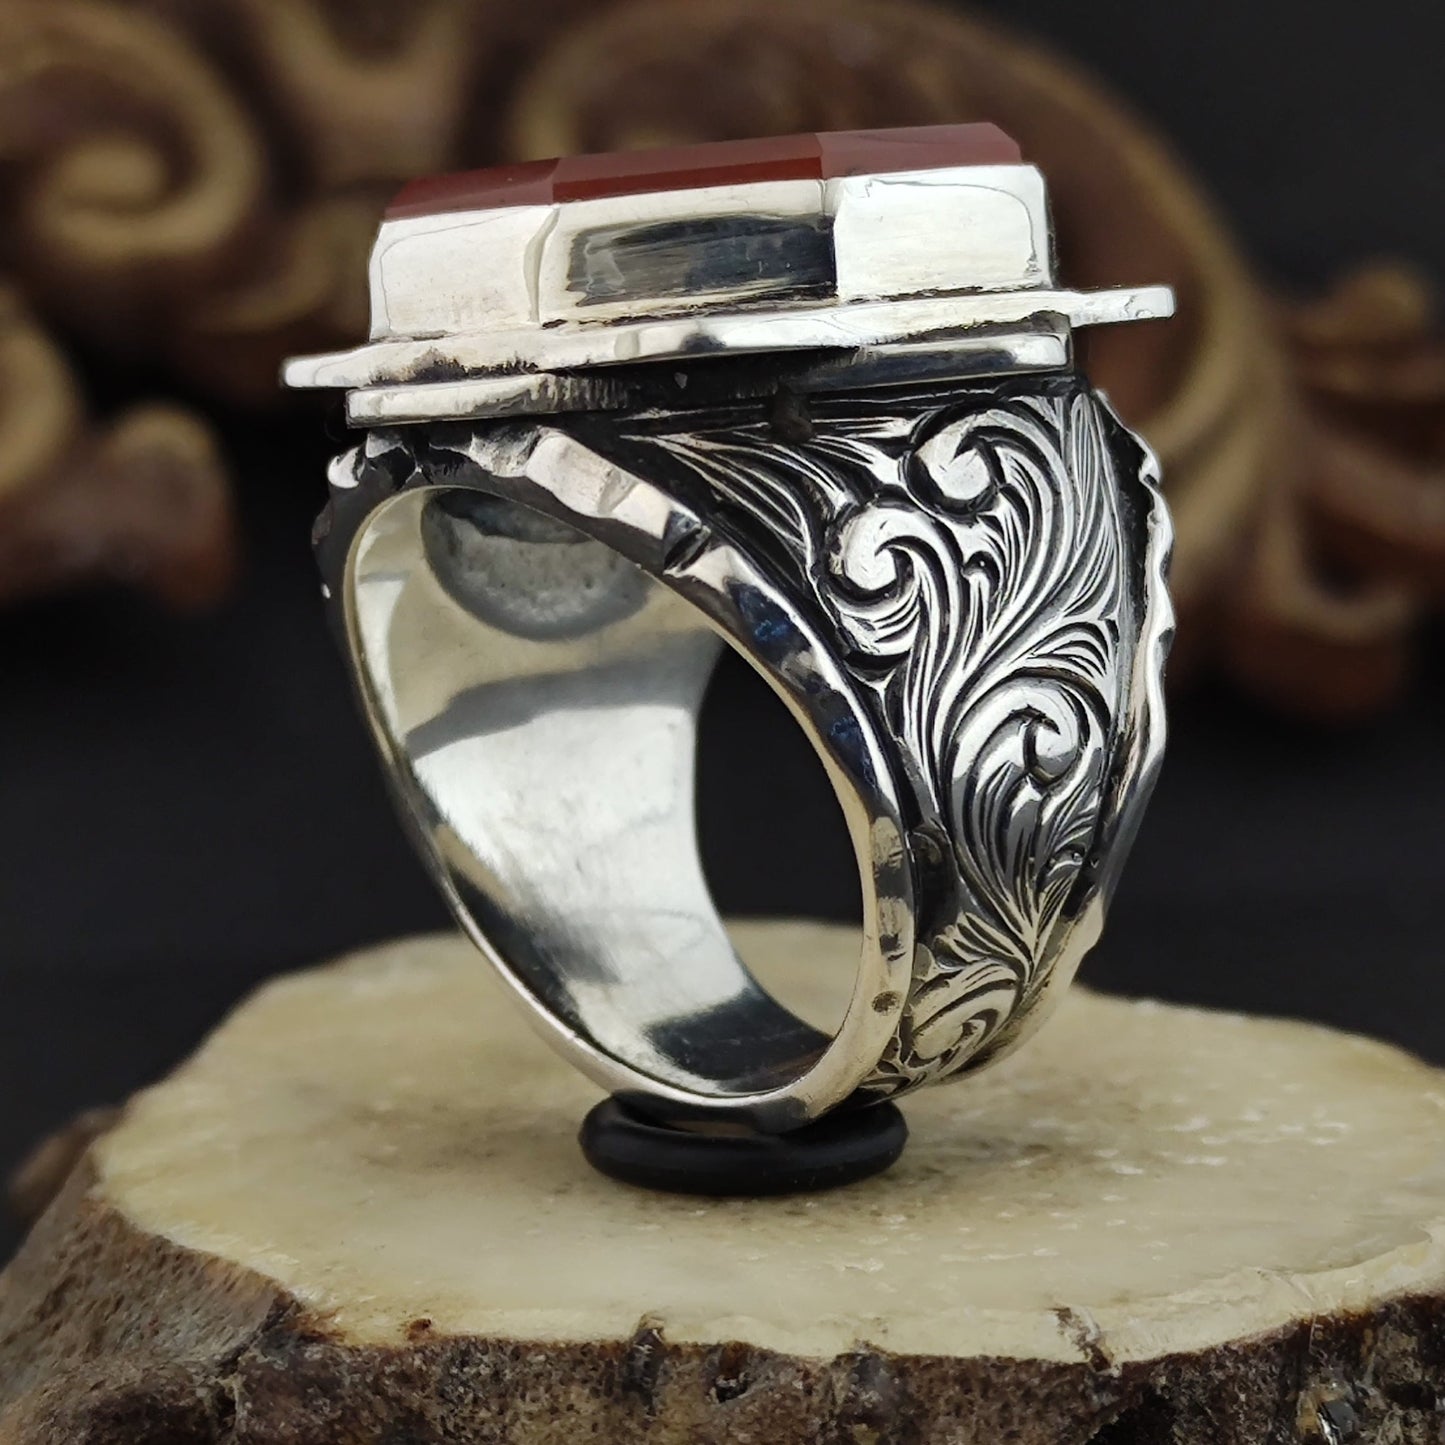 The ring worn by Osman in the TV series Establishment Osman, Double-headed eagle carving with the Seljuk coat of arms on agate stone.